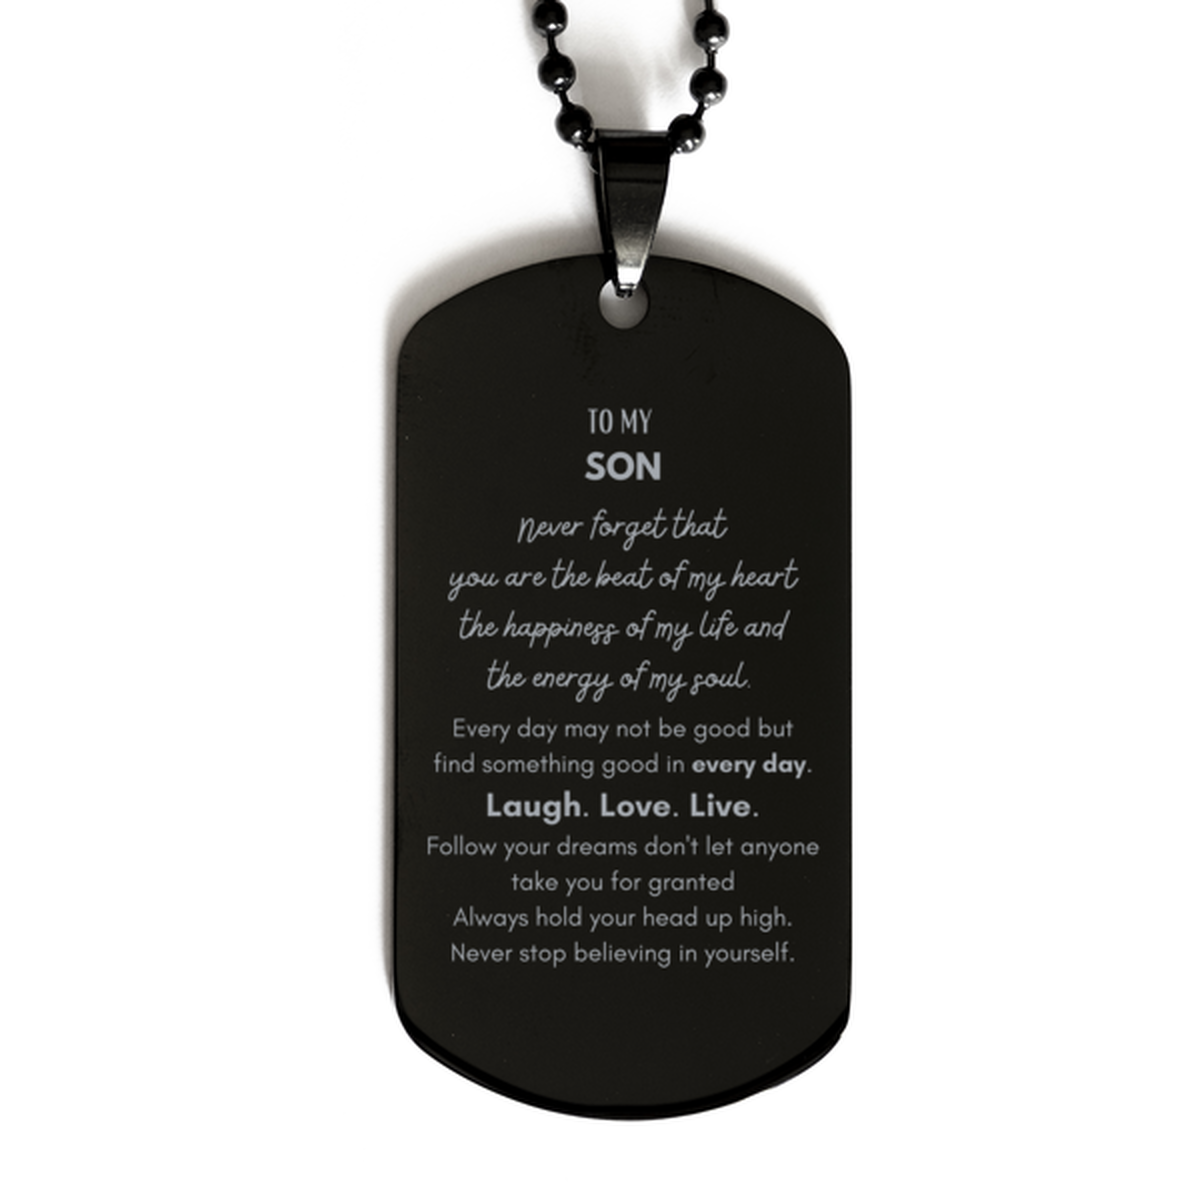 To My Son Dogtag Gifts, Christmas Son Black Dog Tag Present, Birthday Unique Motivational For Son, To My Son Never forget that you are the beat of my heart the happiness of my life and the energy of my soul